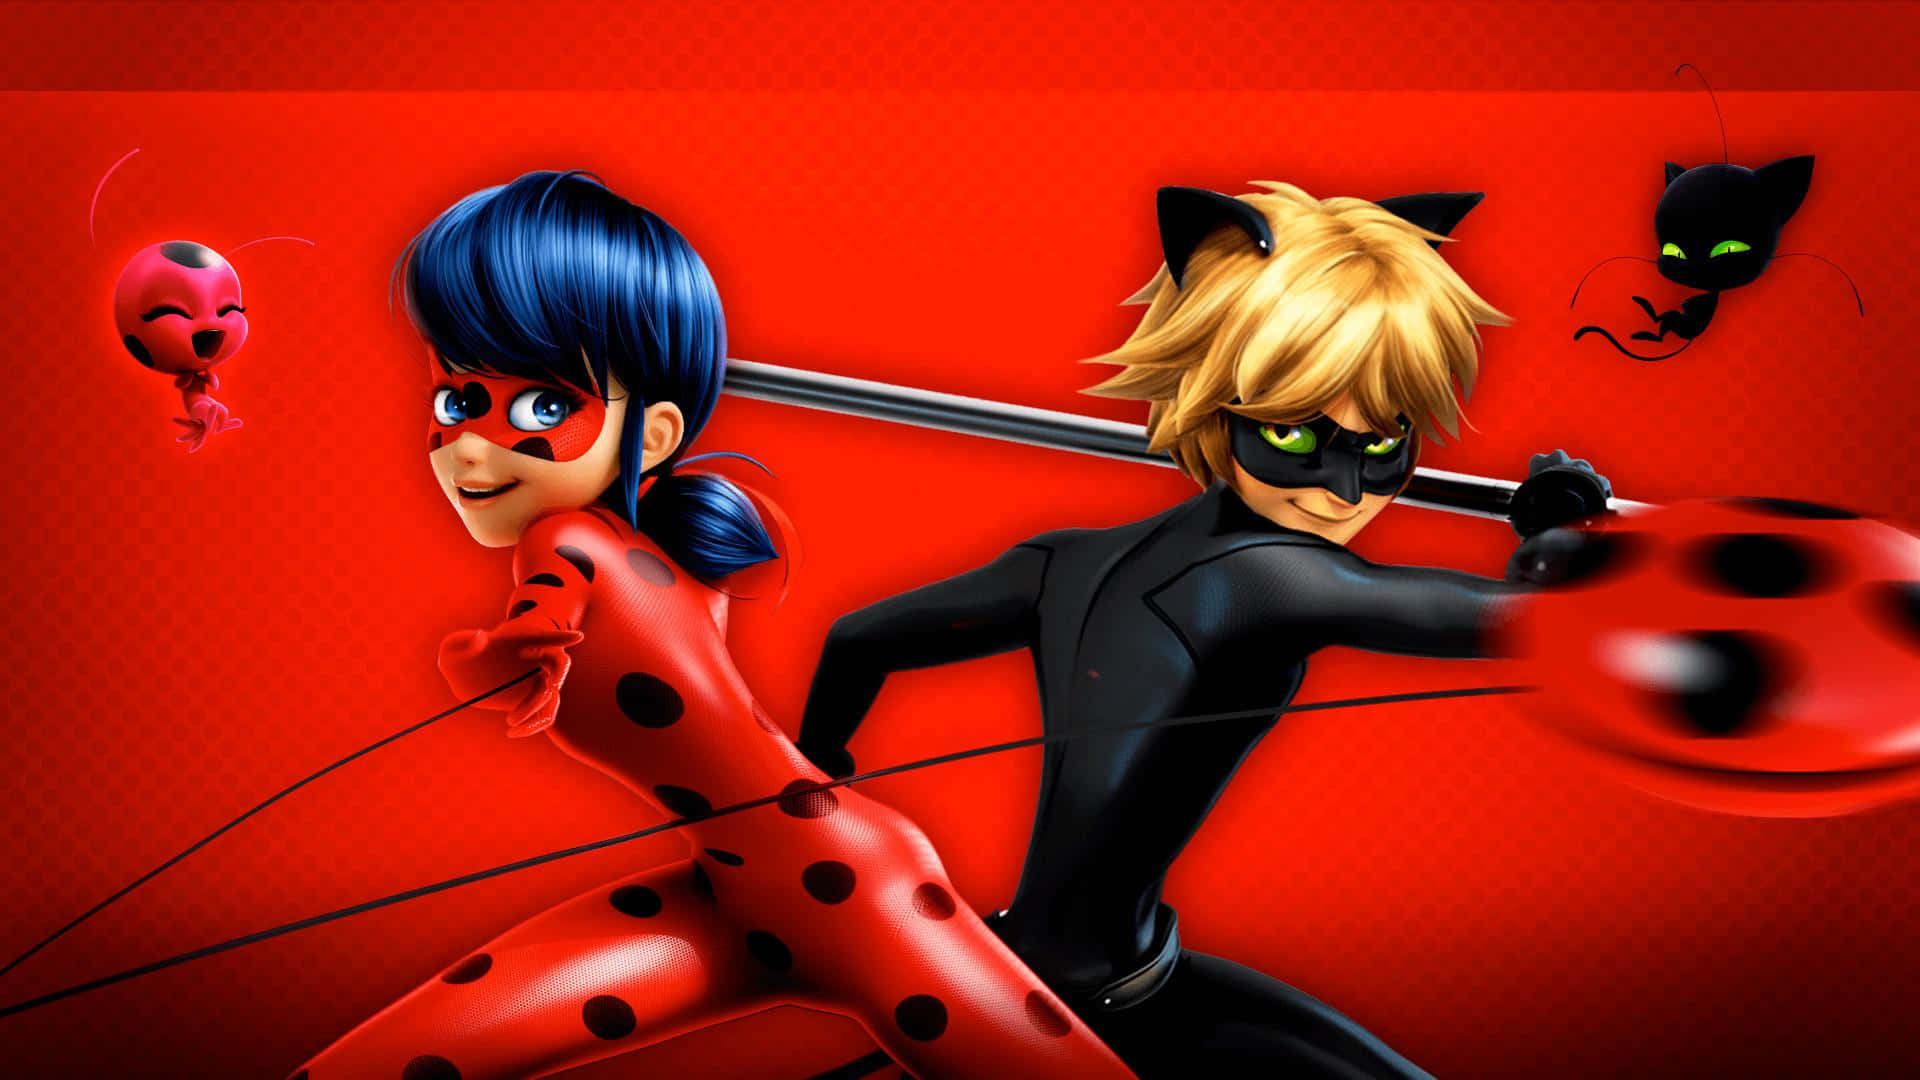 Ladybug and Cat Noir, save the day in Paris